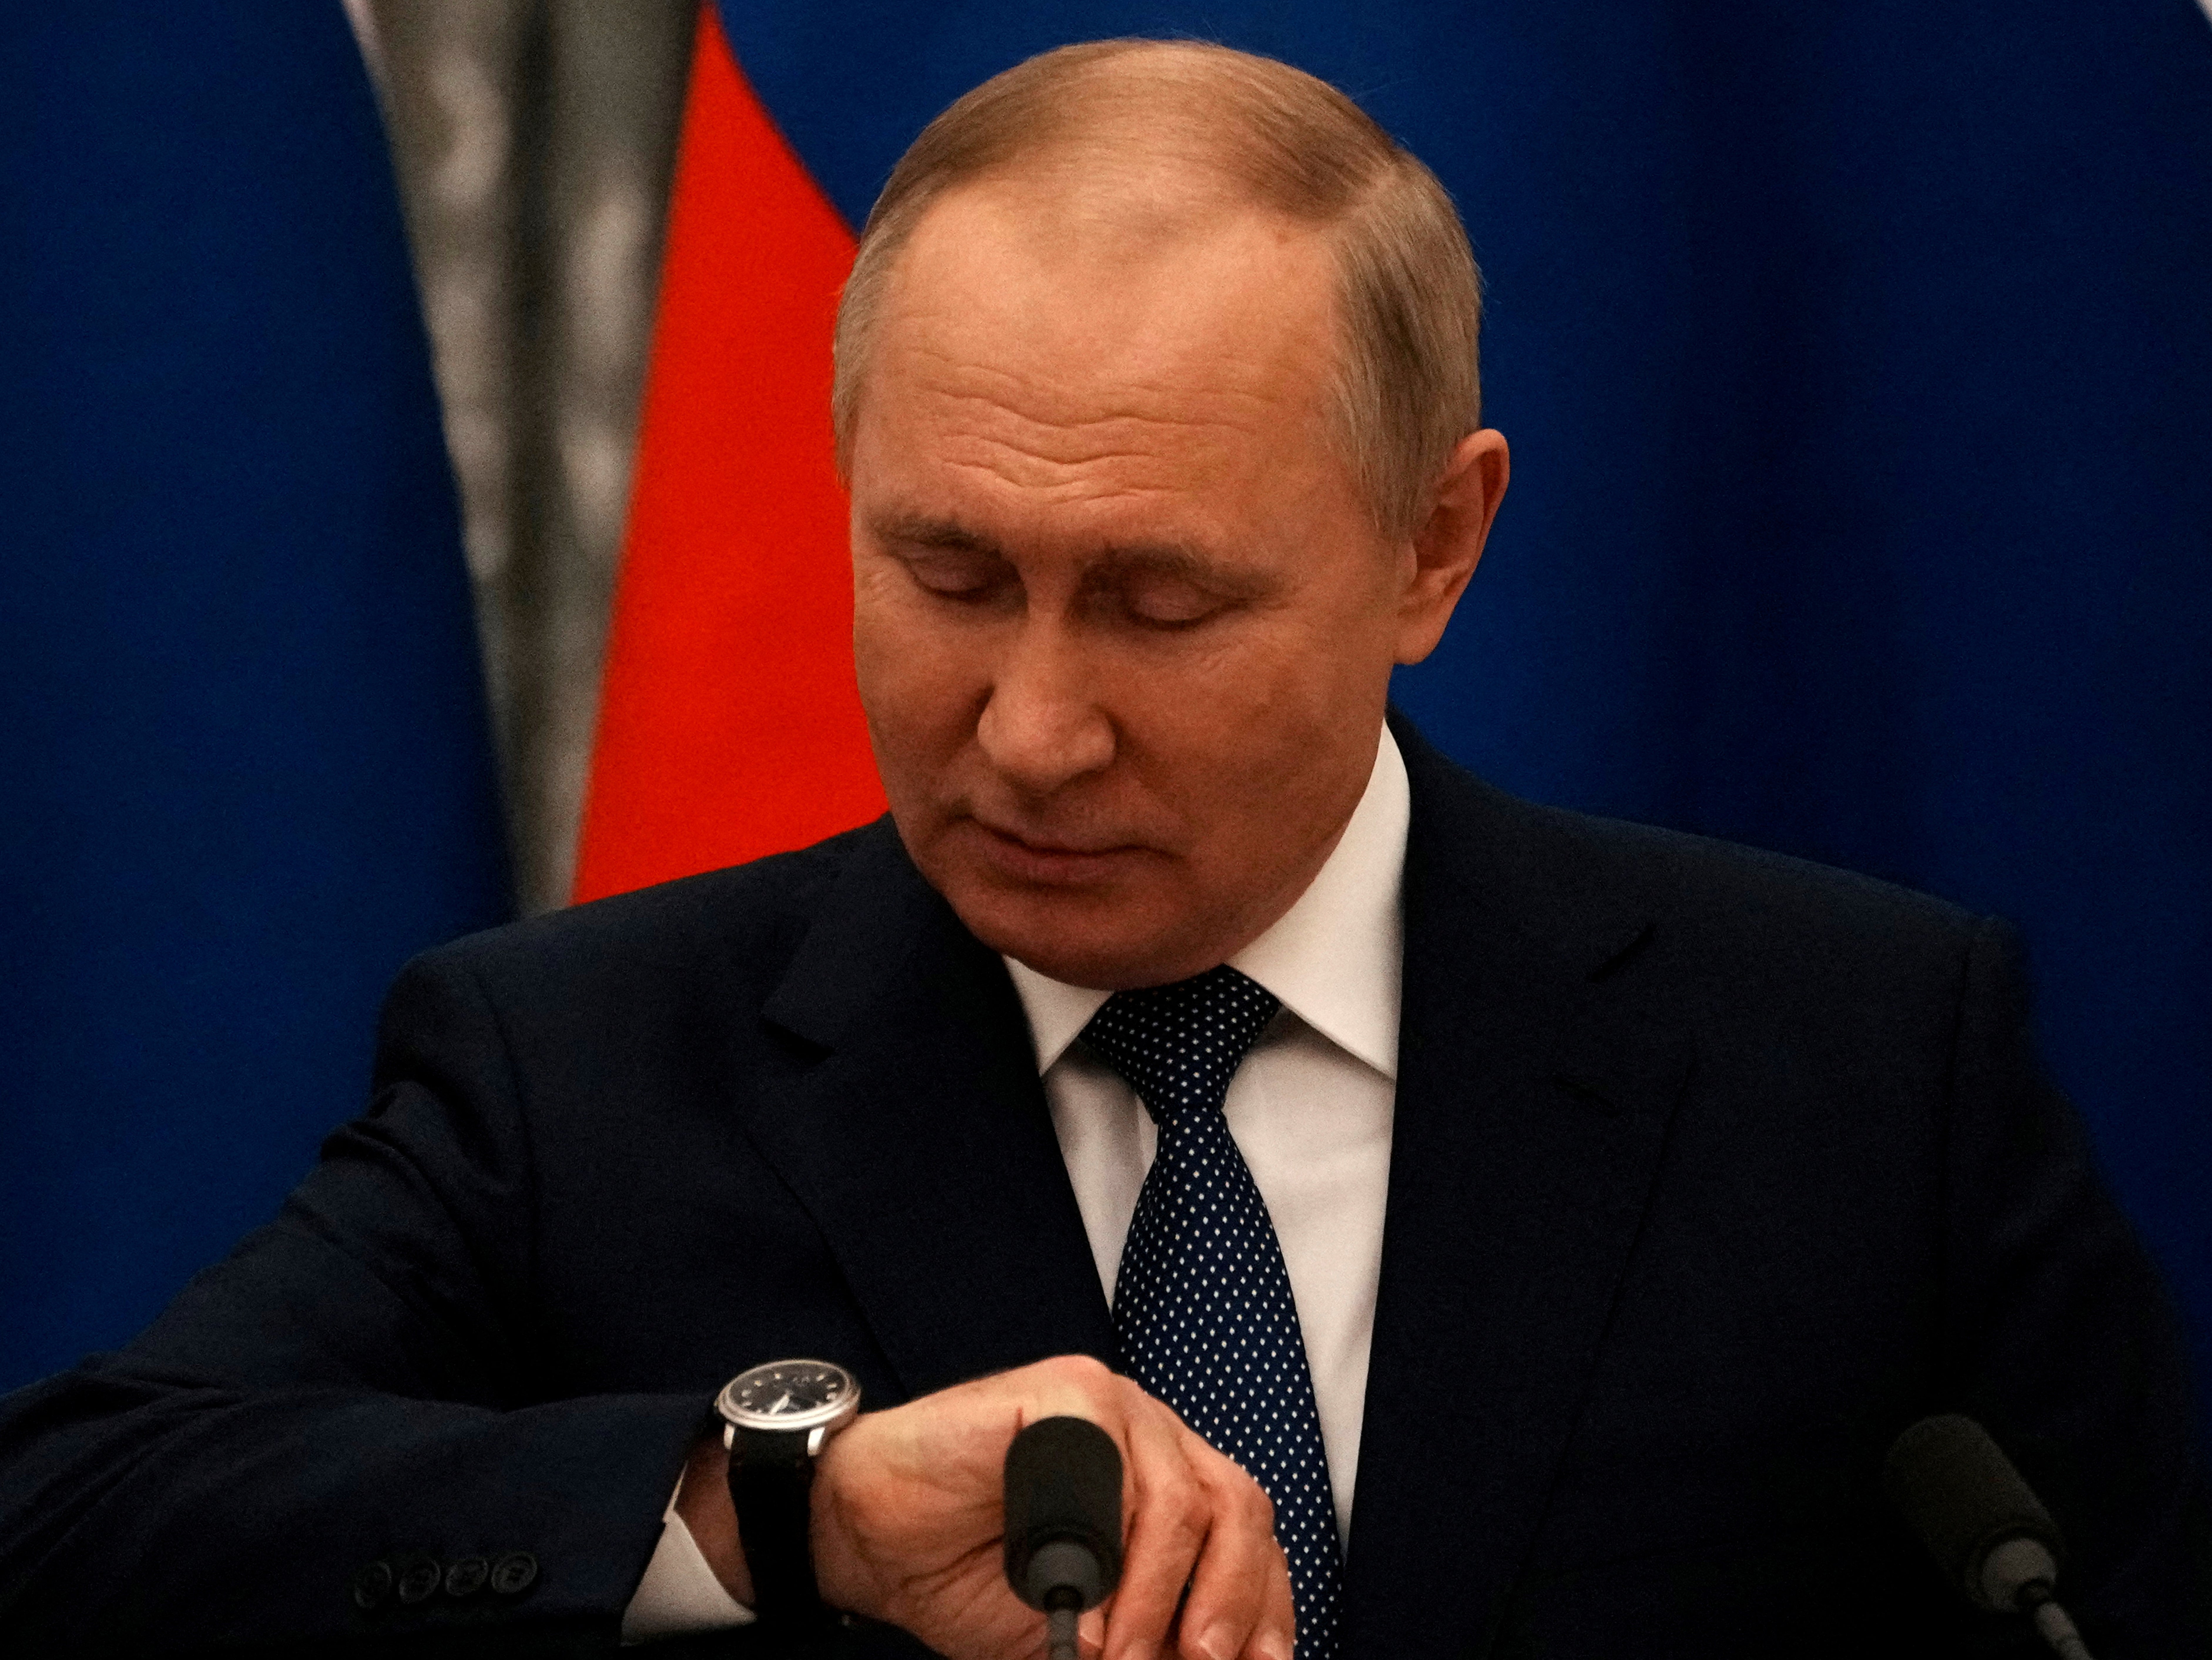 Timing is everything for Vladimir Putin when he faces down rival leaders